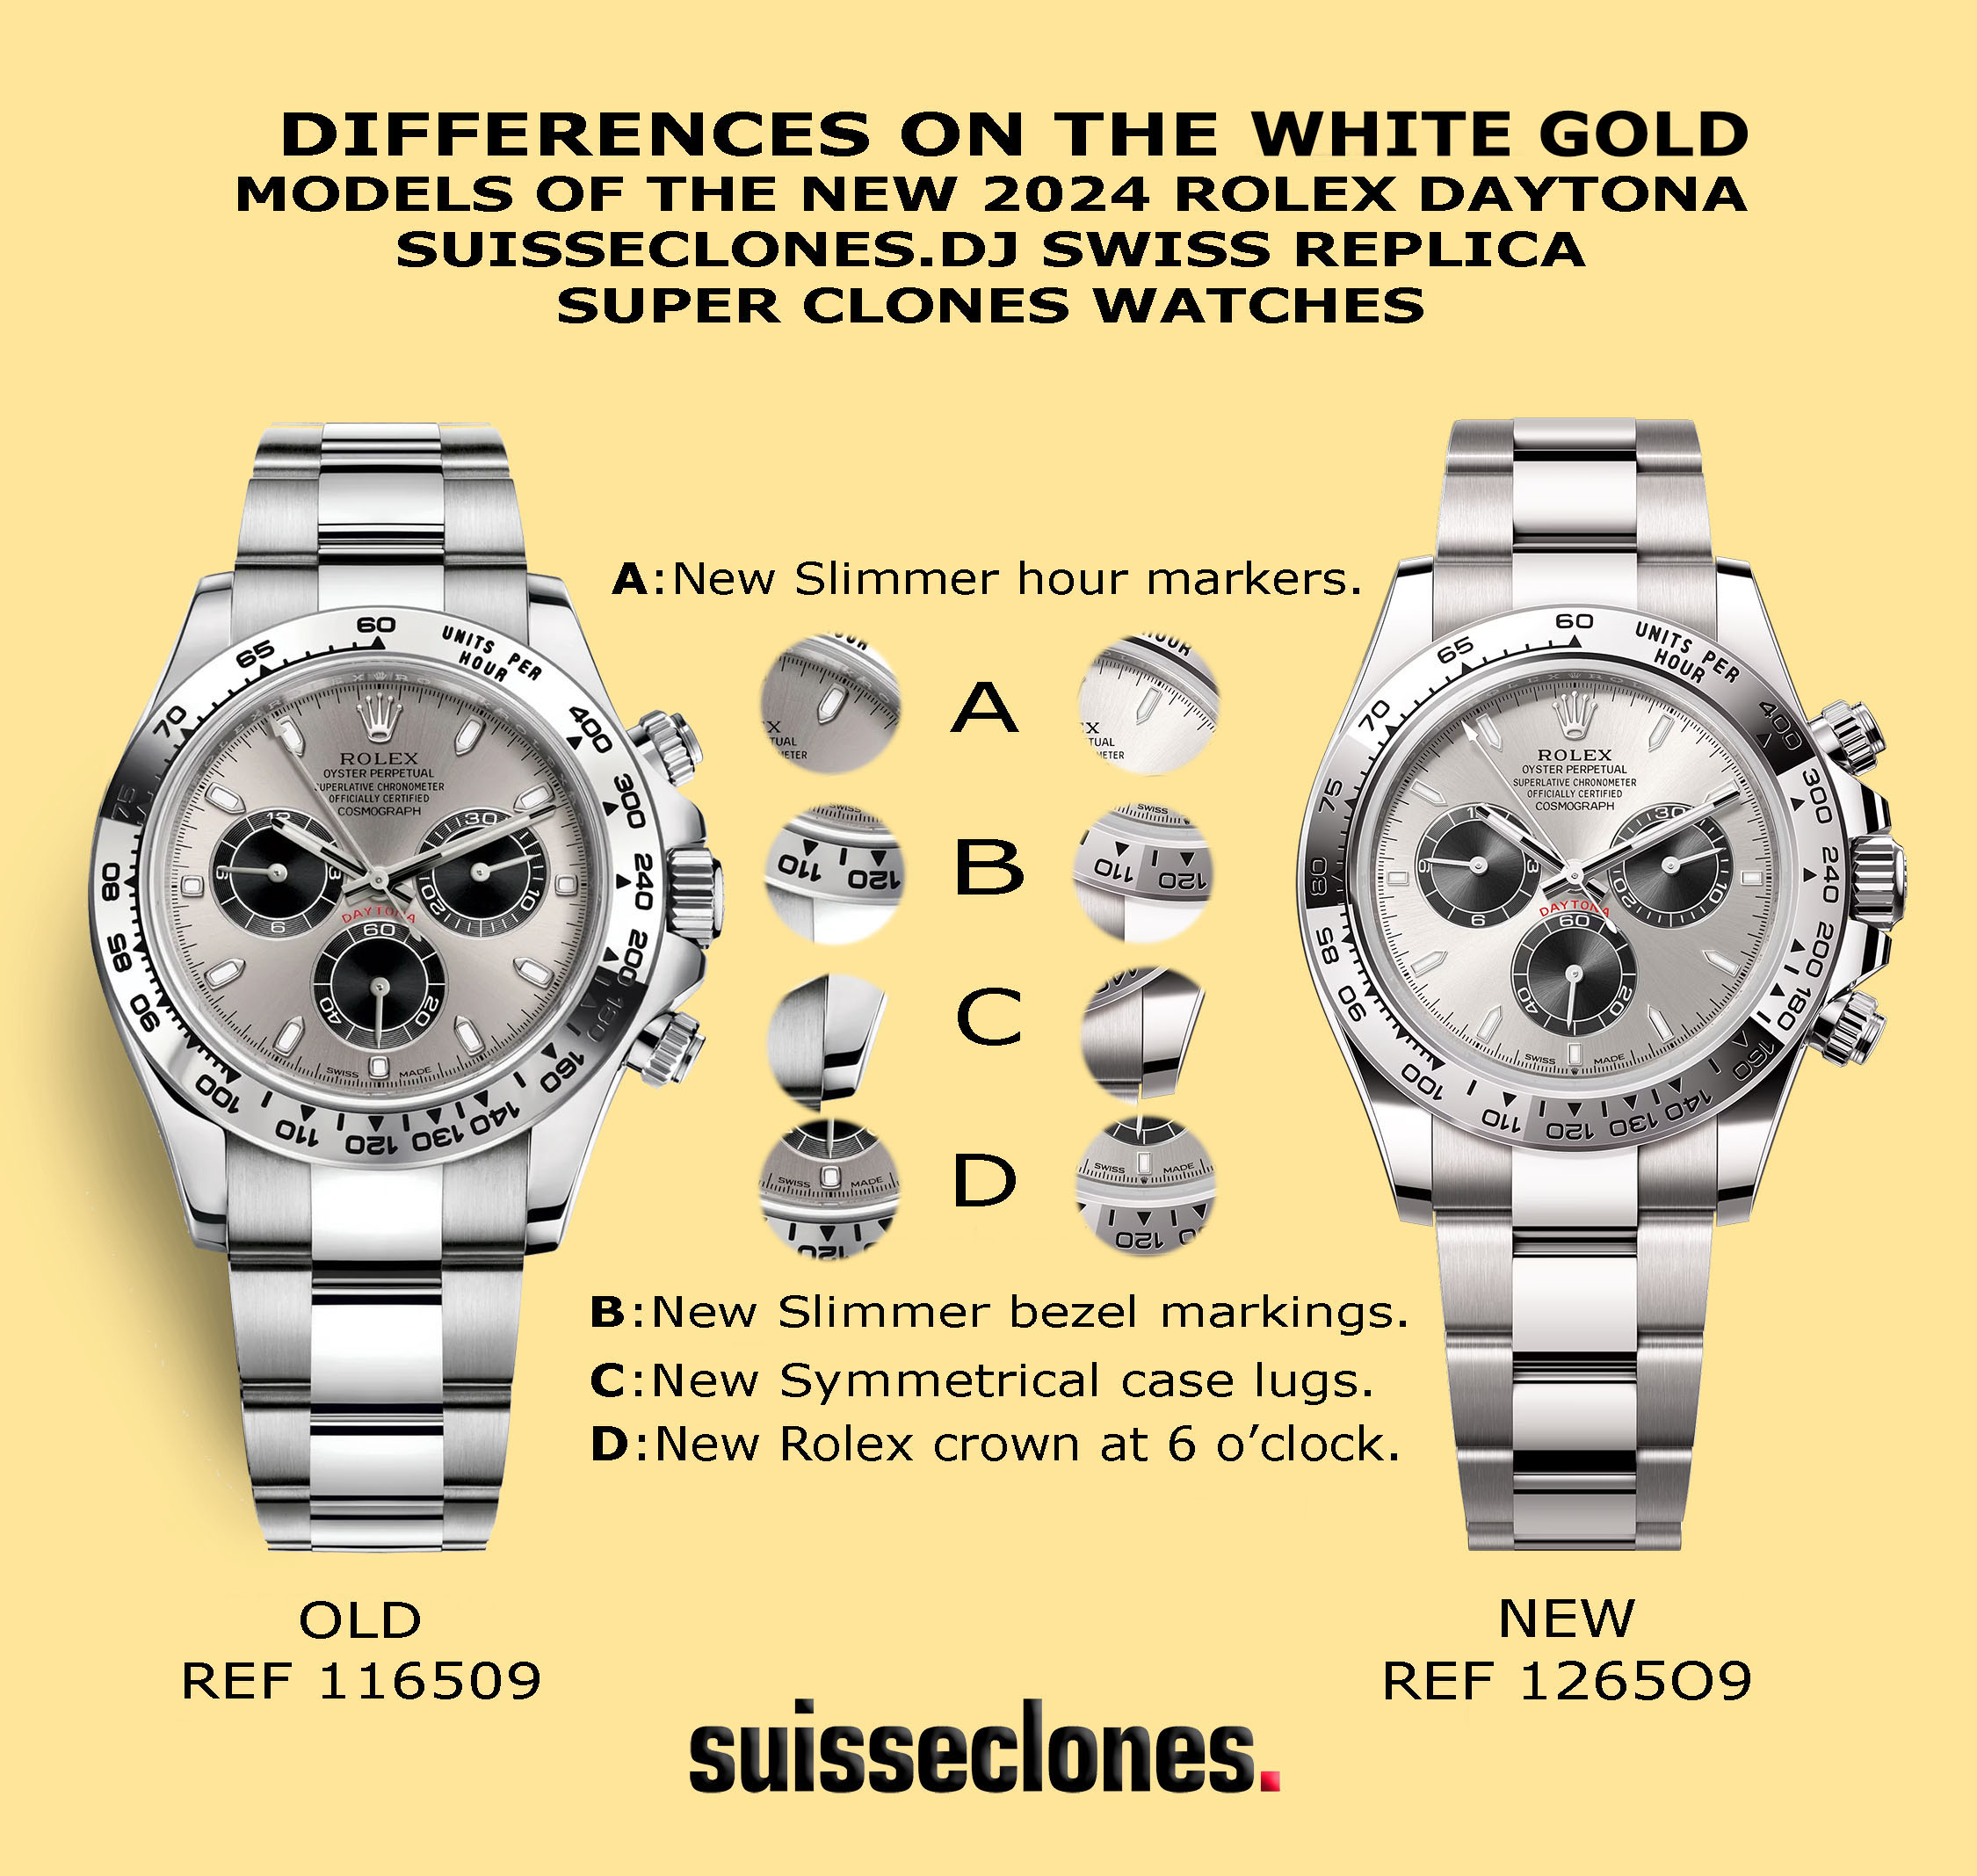 Infographics For The Upgrades Of The Suisseclones.dj 2024 Swiss Replica Daytona 18k White Gold And Platinum Models Super Clone Watches.